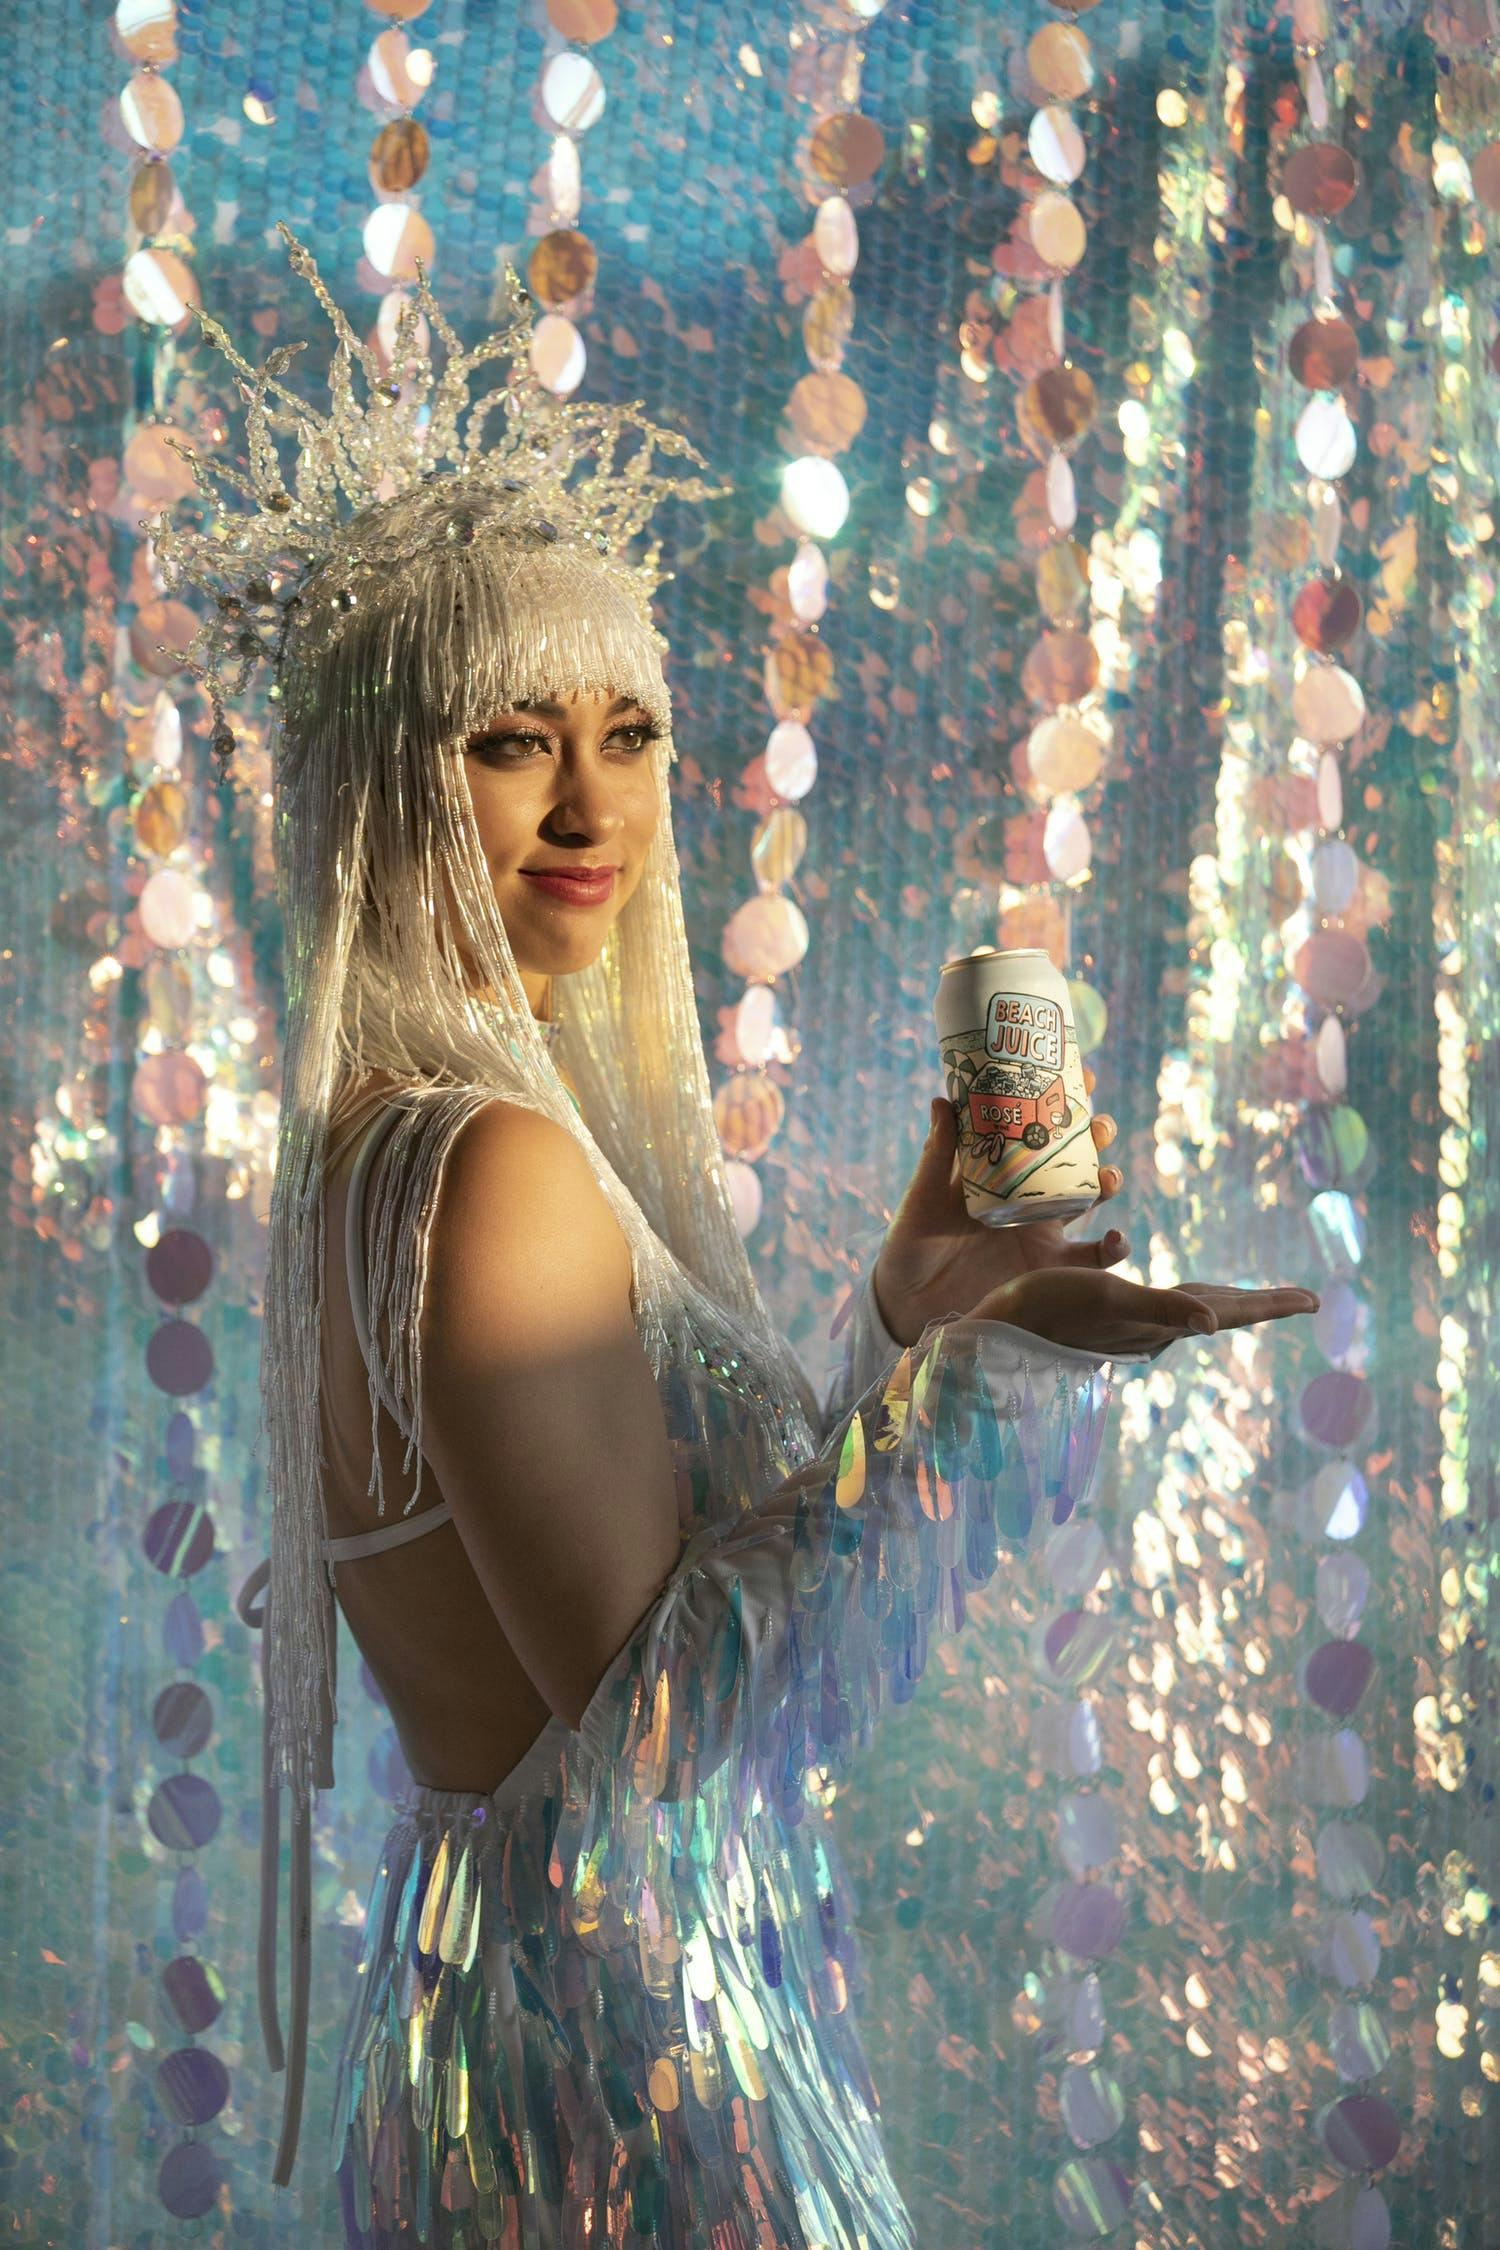 Woman holding beer can against a backdrop of iridescent décor